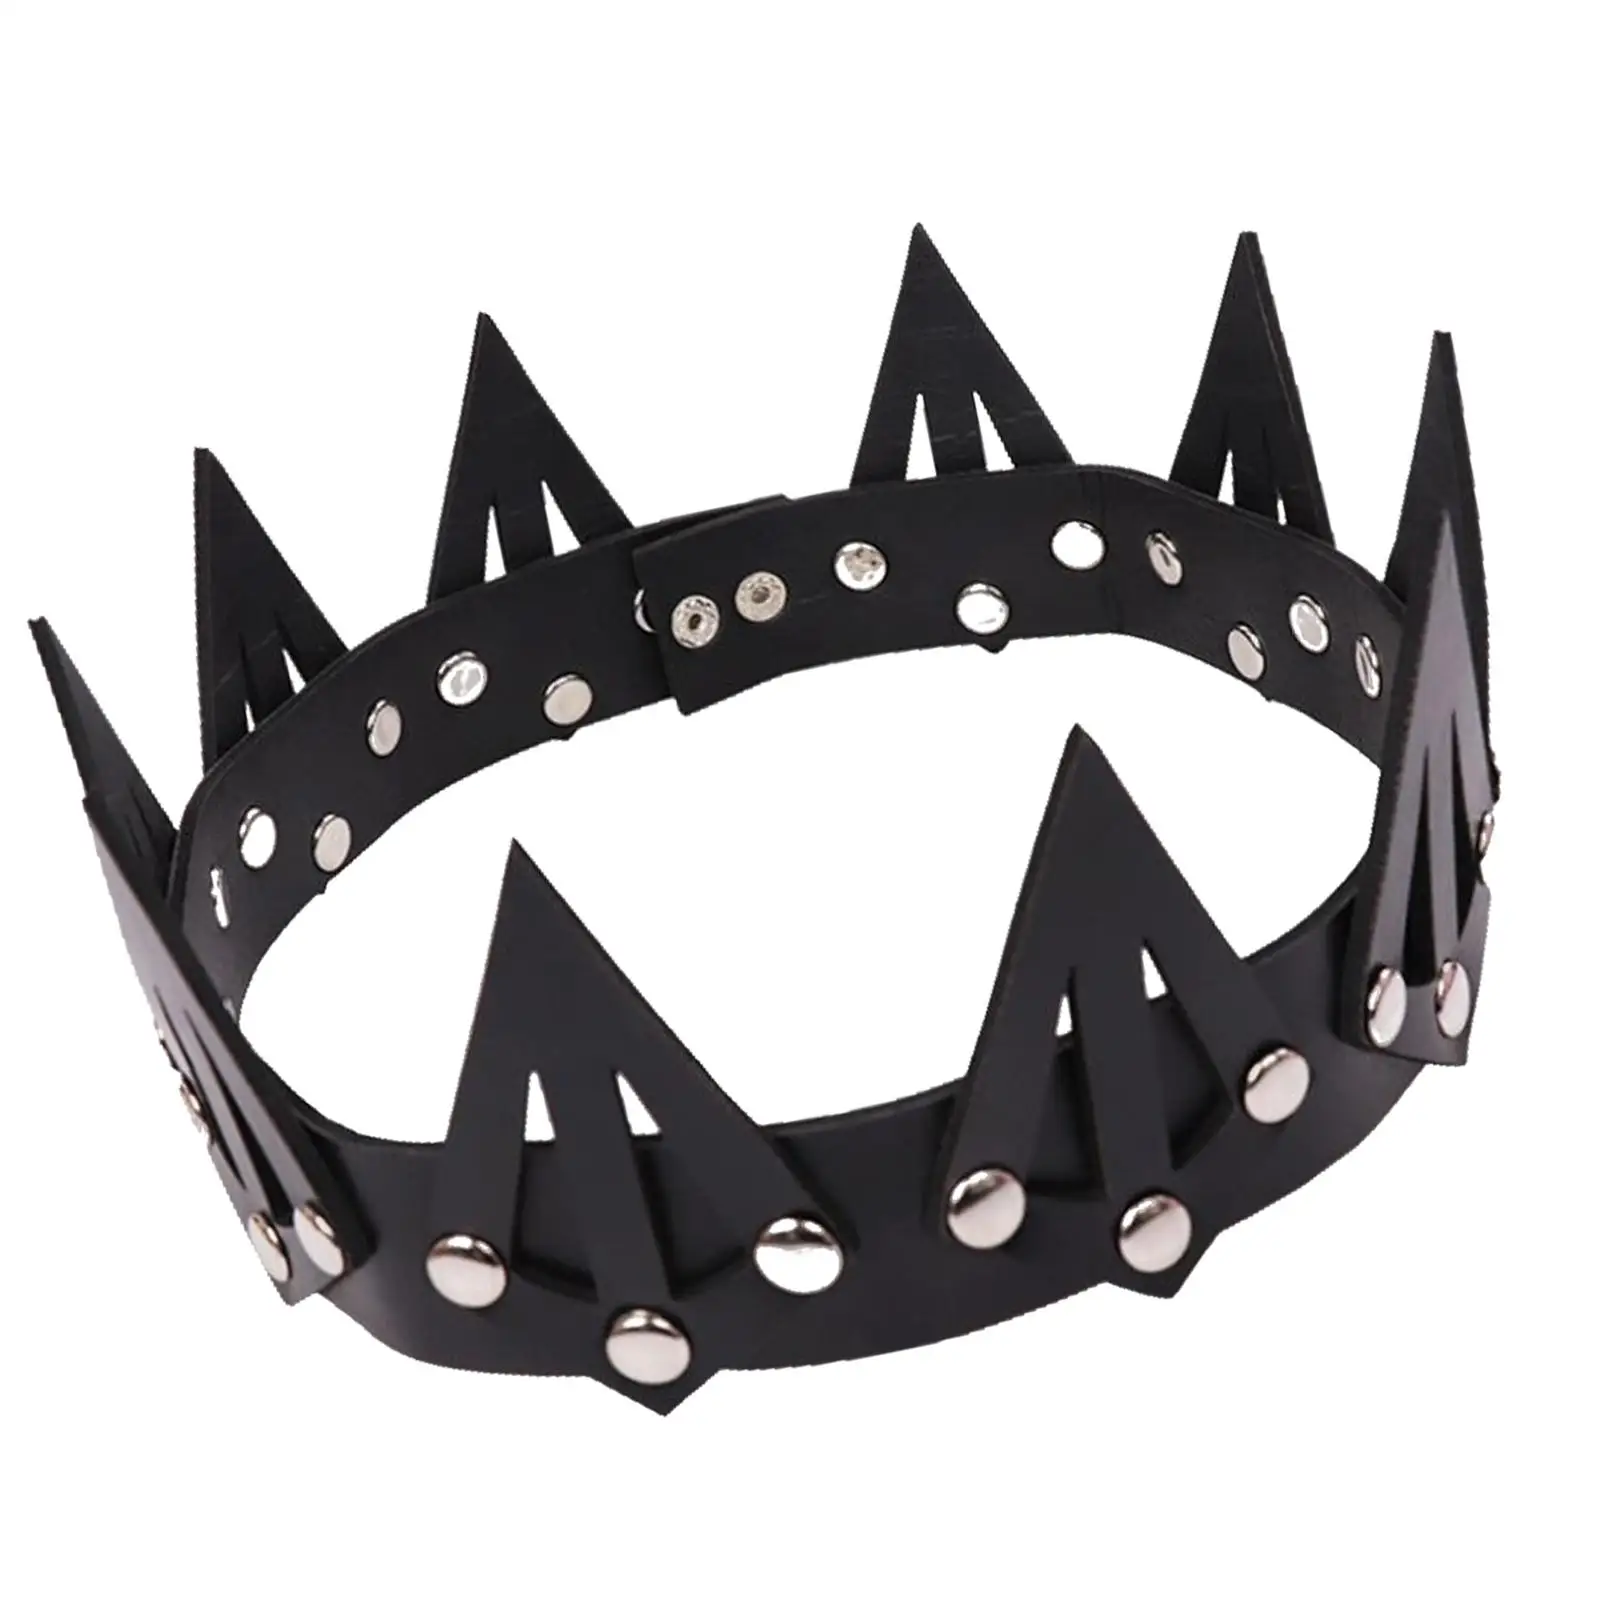 Medieval crown Tiara Antique Style Headband Black Decorative for Costume Accessories Prom Cosplay Party Princess